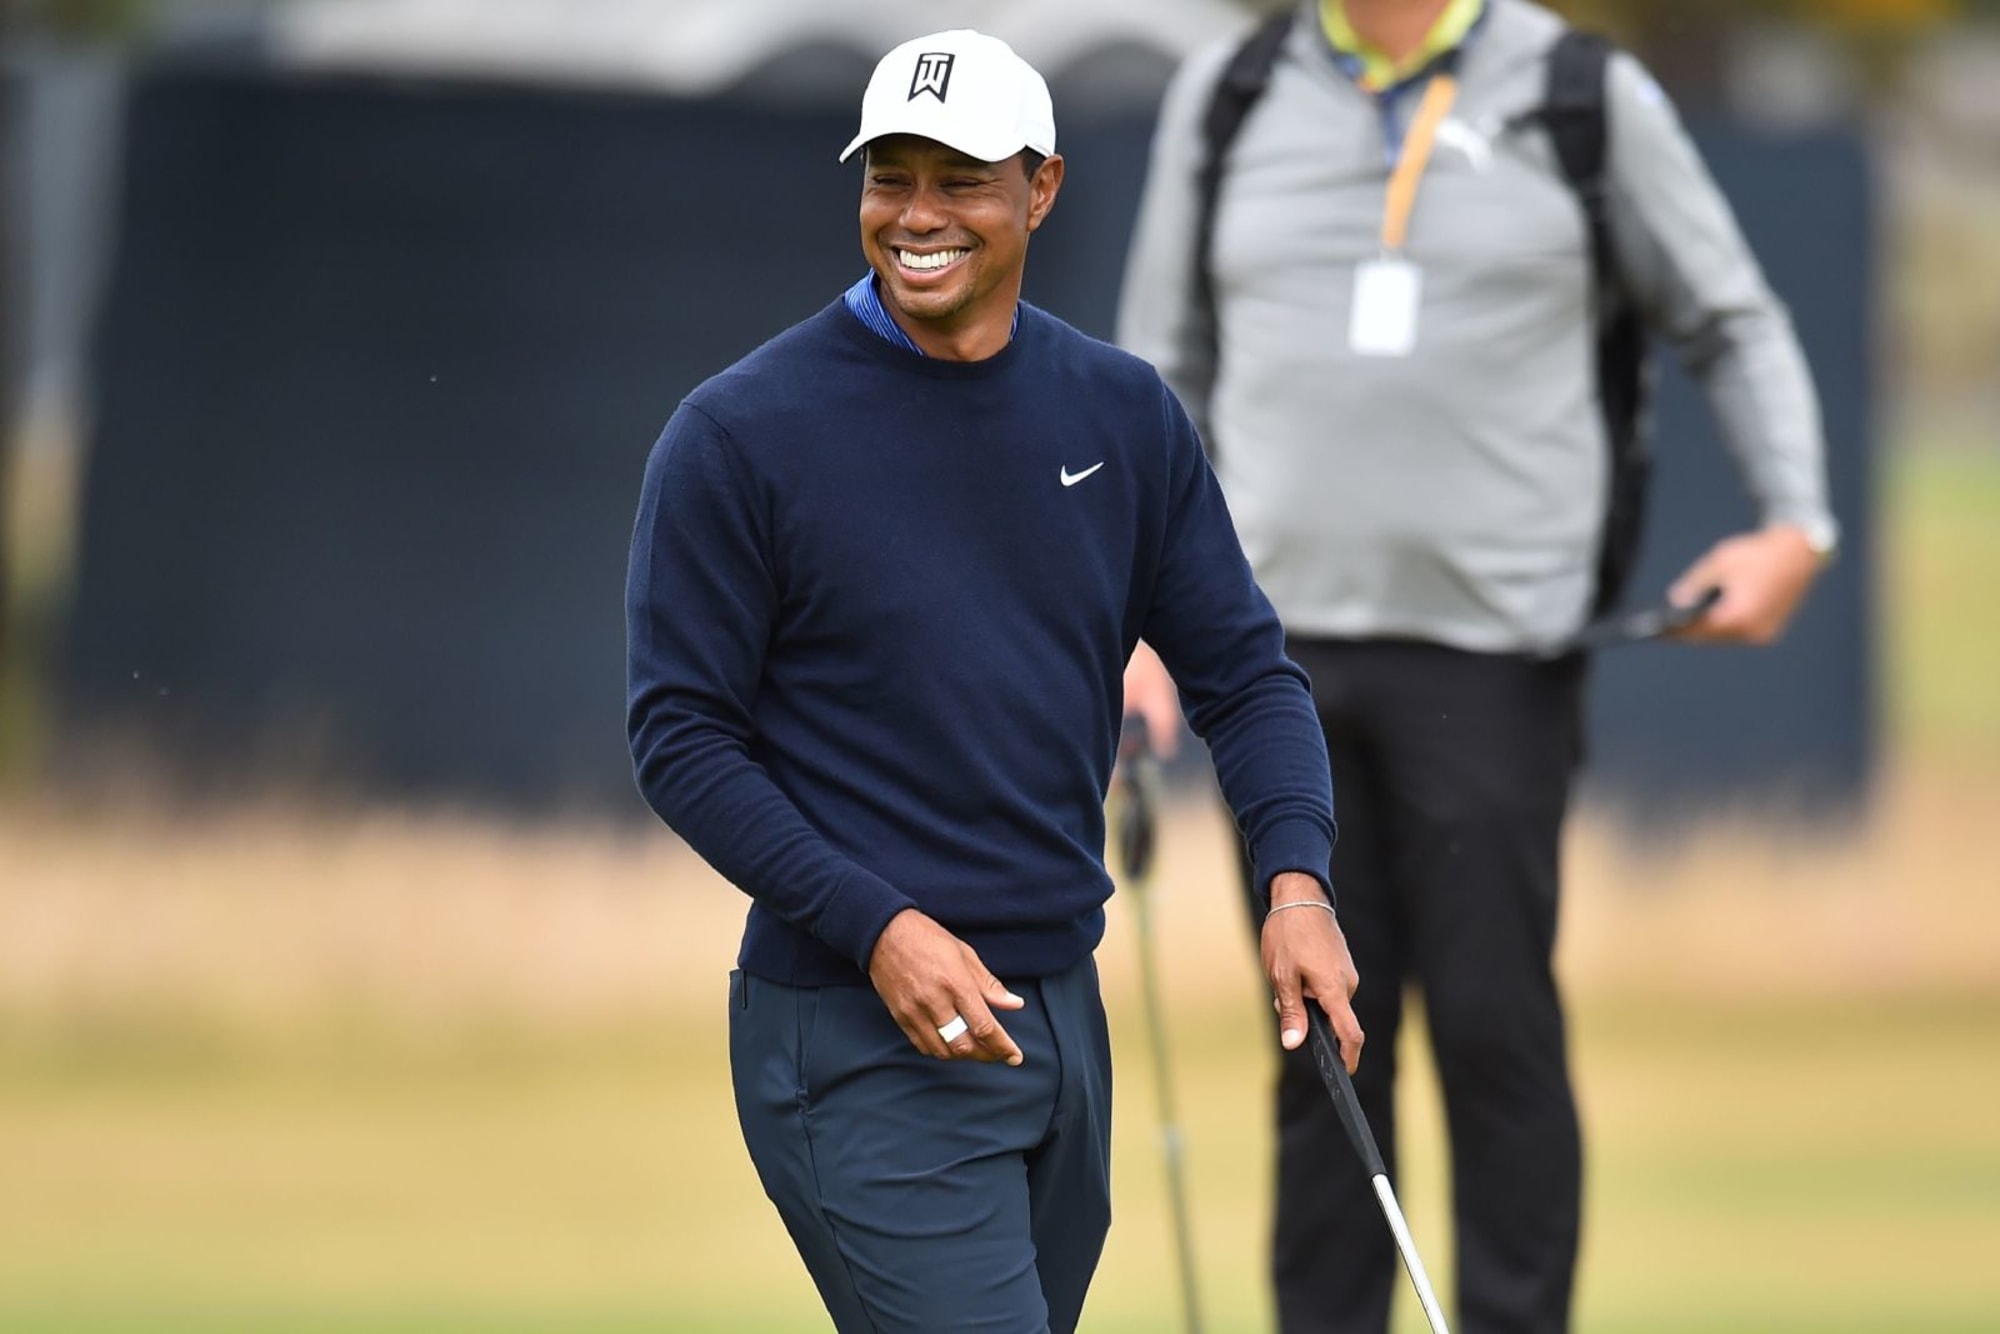 Tiger Woods returns to The Open Championship